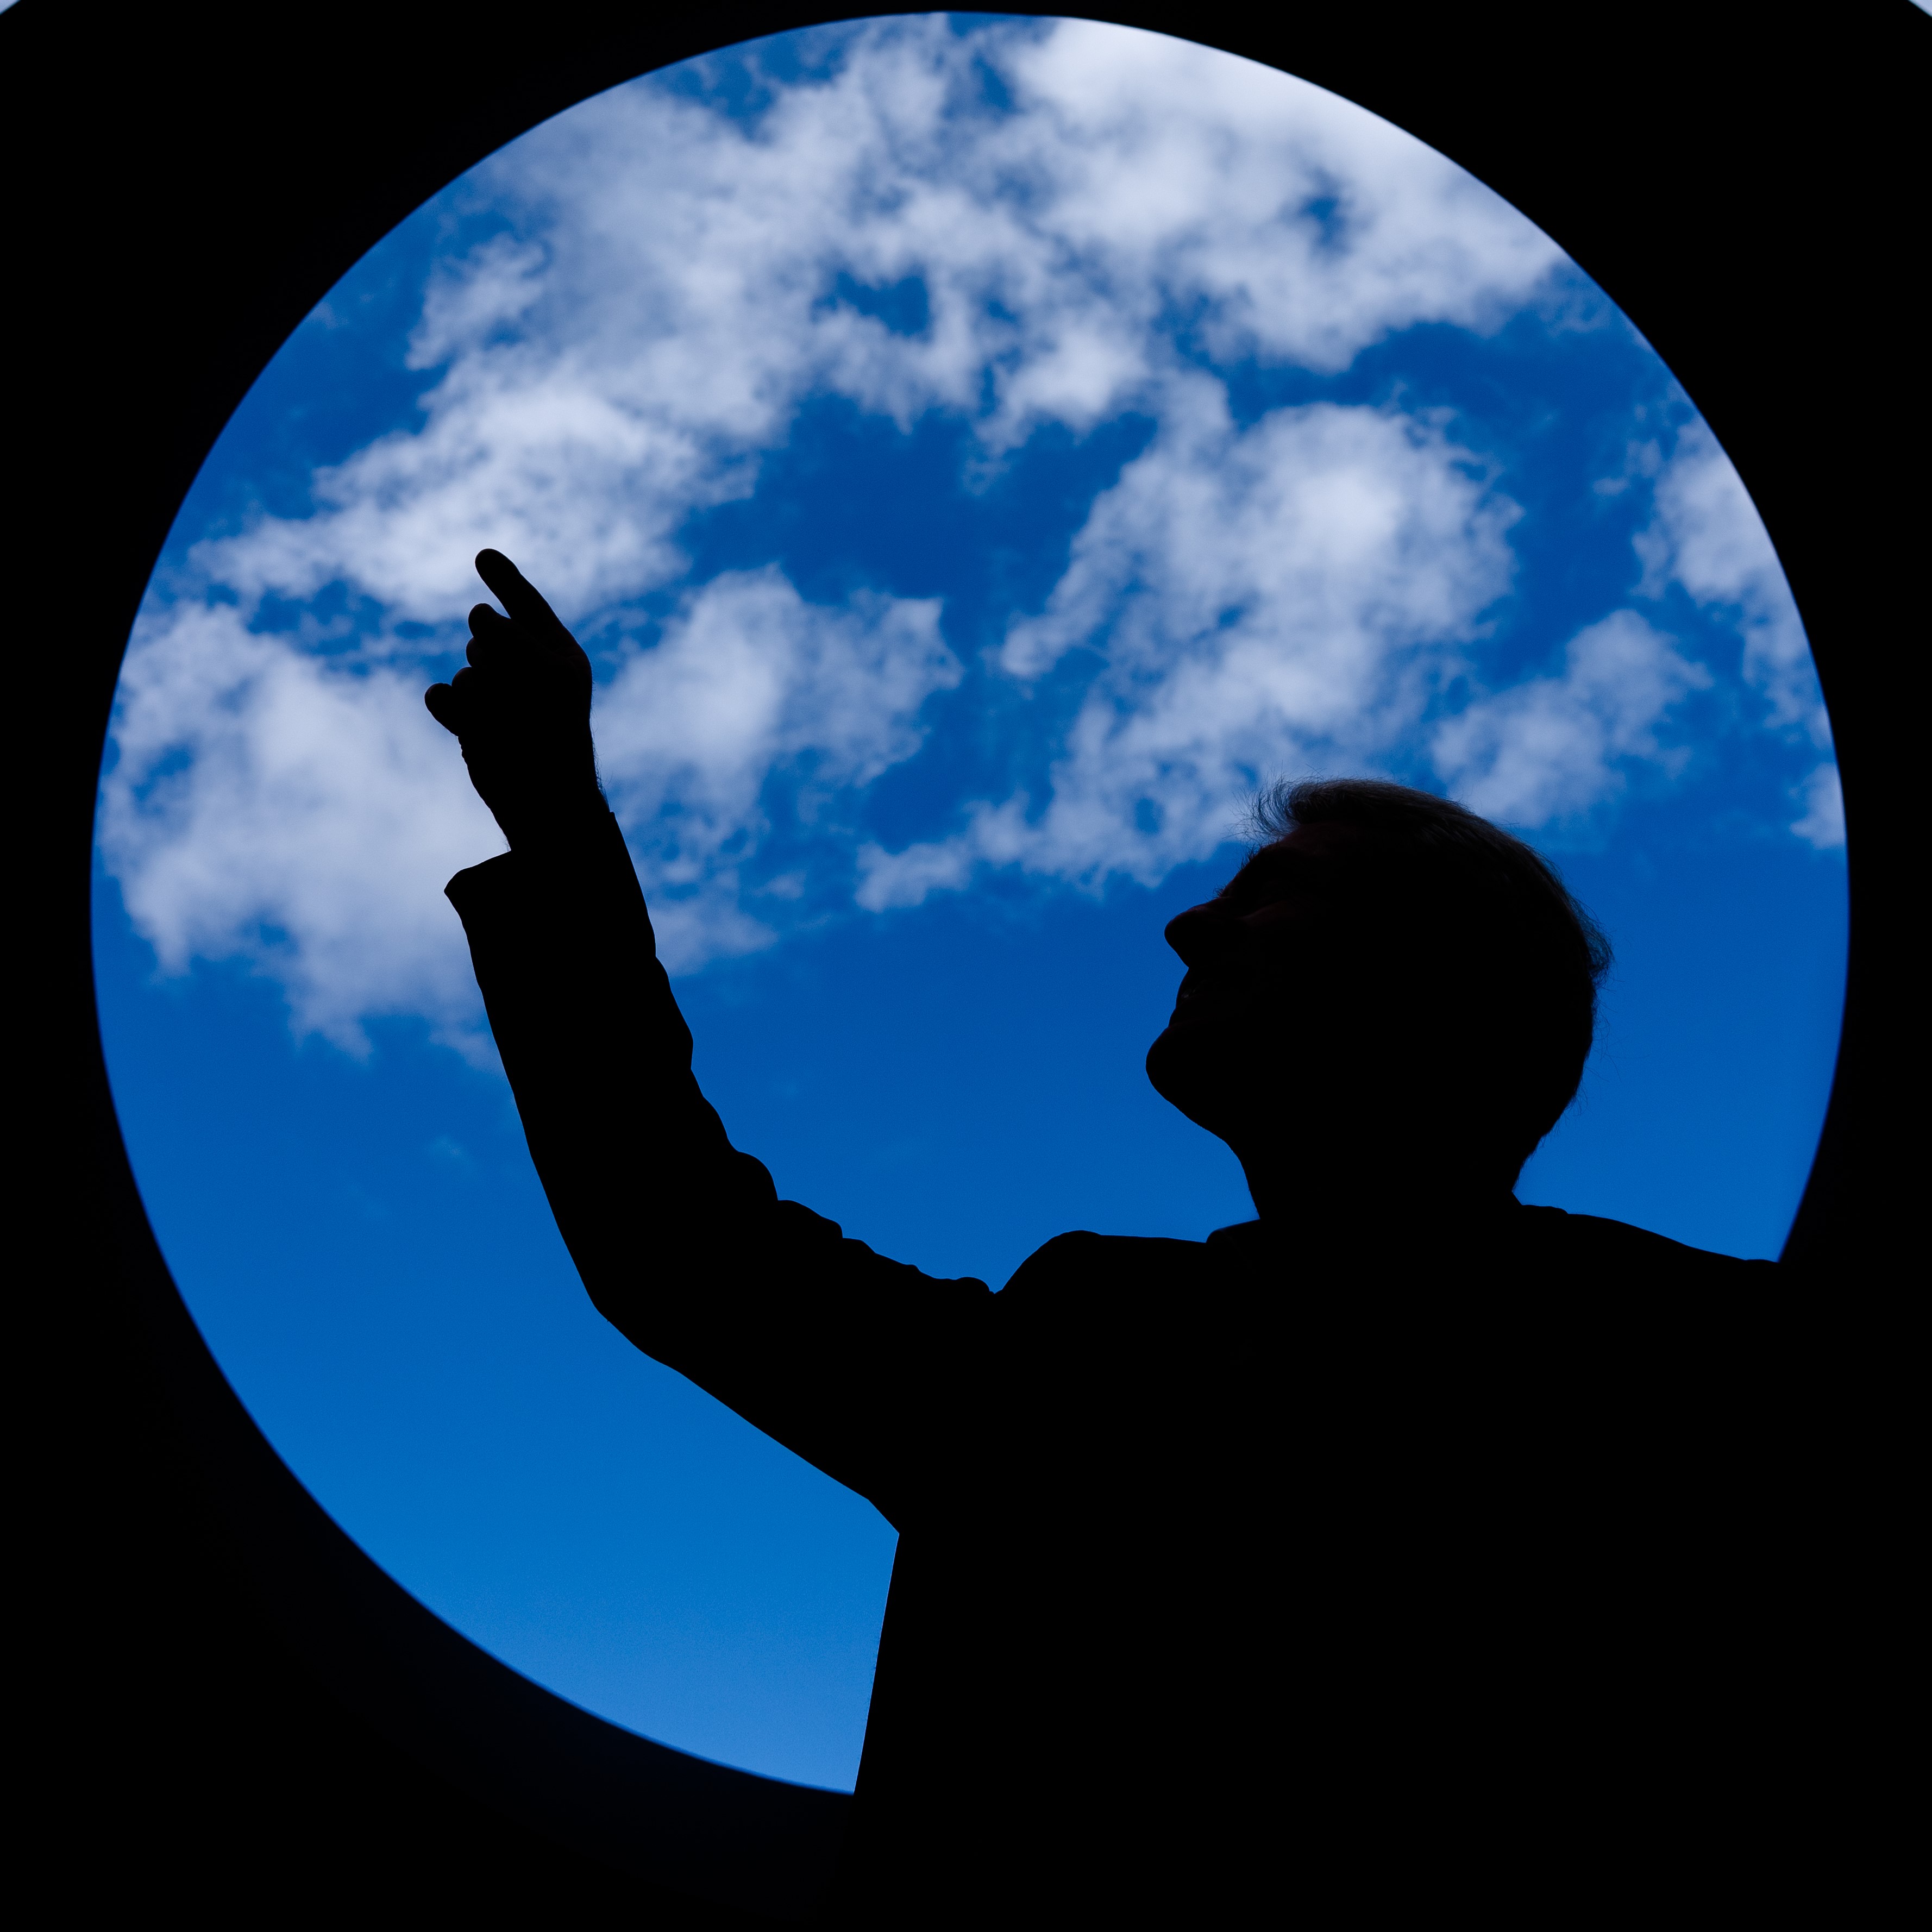 silhoutte of a person pointing up at clouds in a blue sky from inside a circle